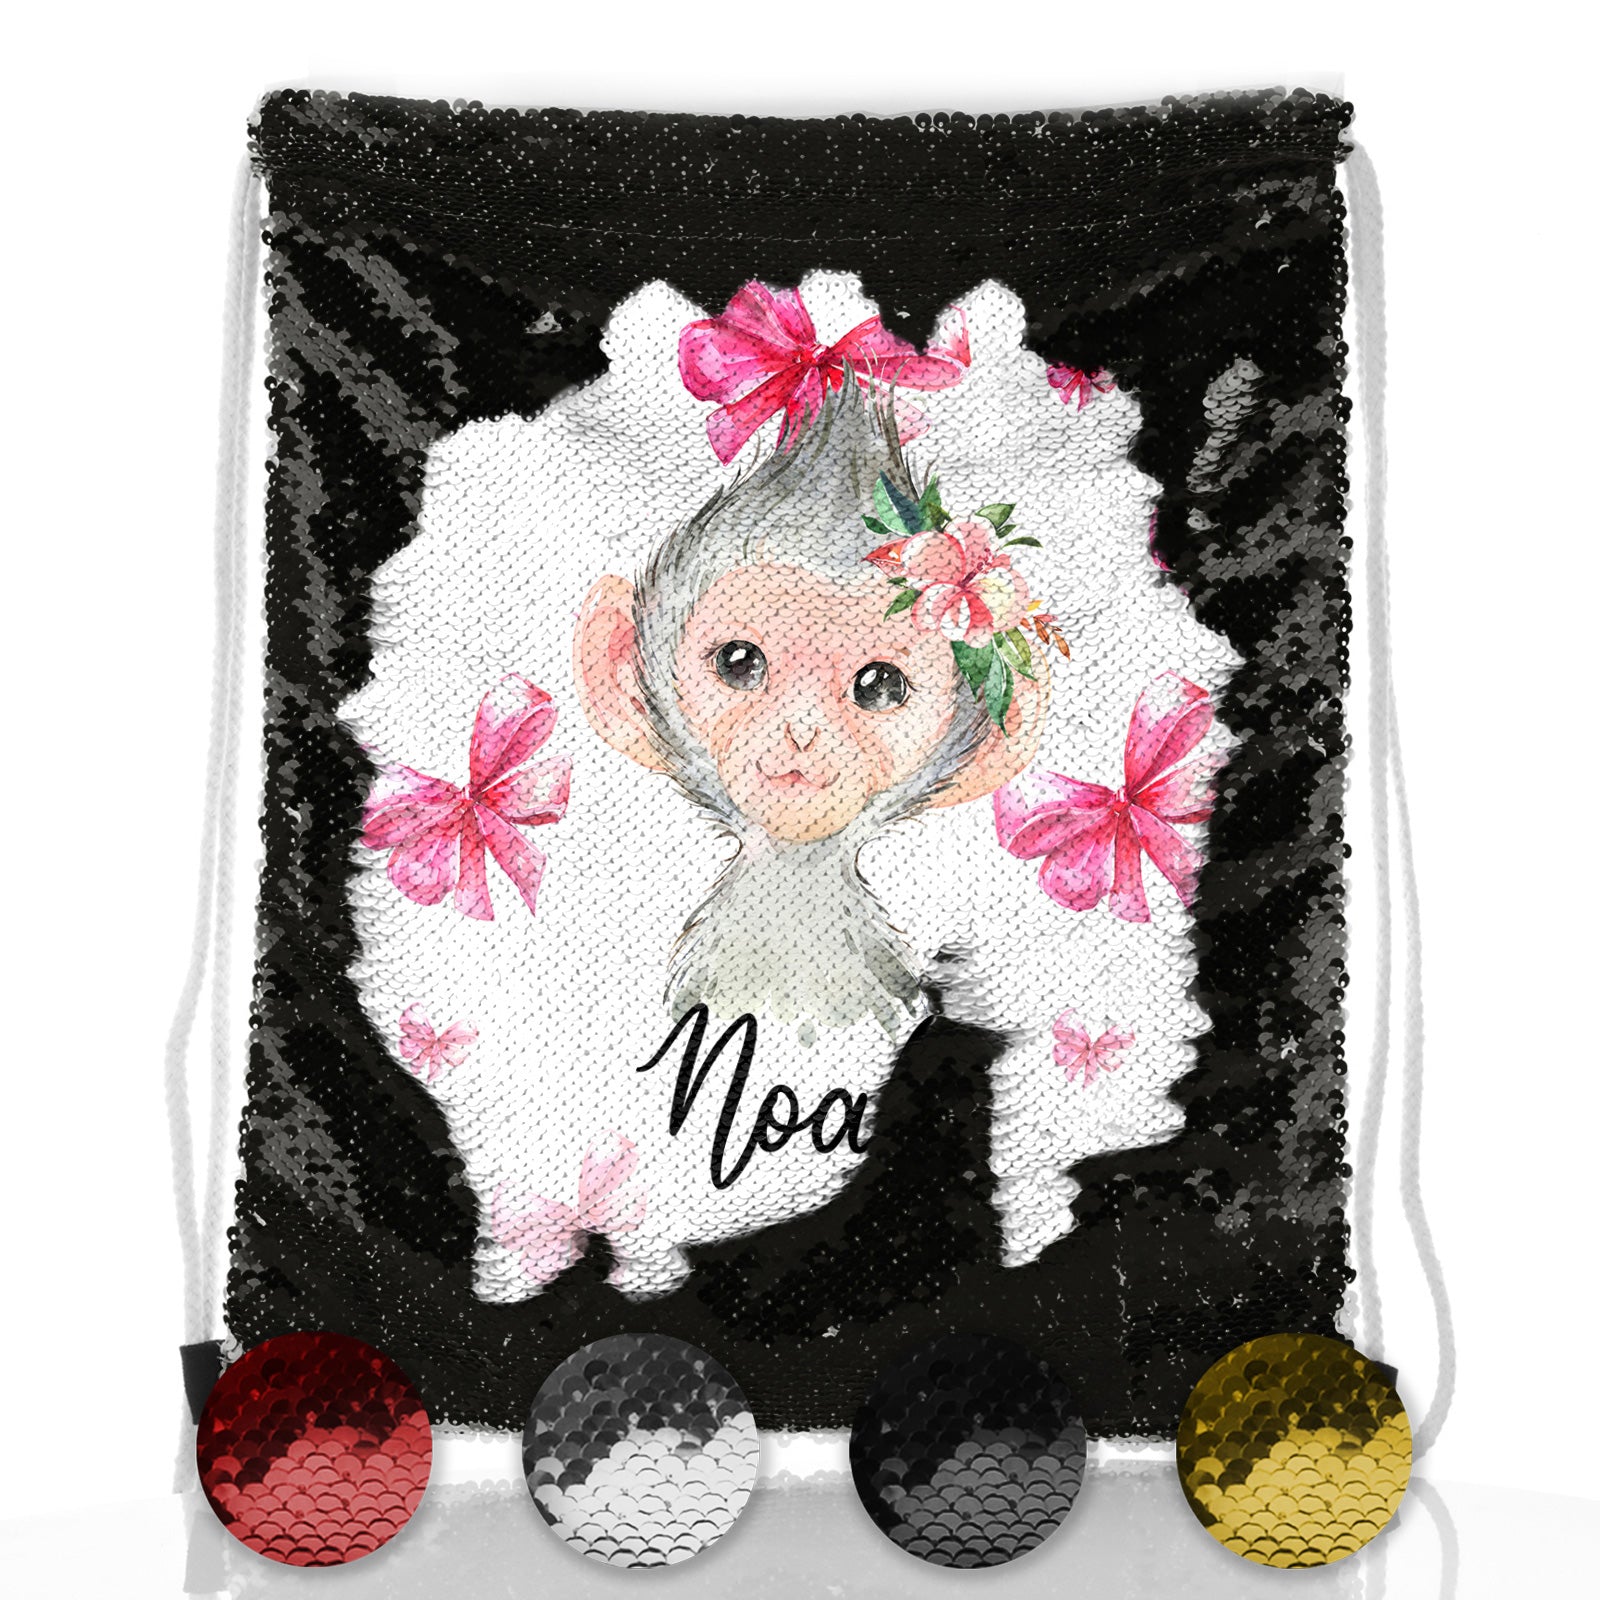 Personalised Sequin Drawstring Backpack with Monkey Pink Bows and Cute Text